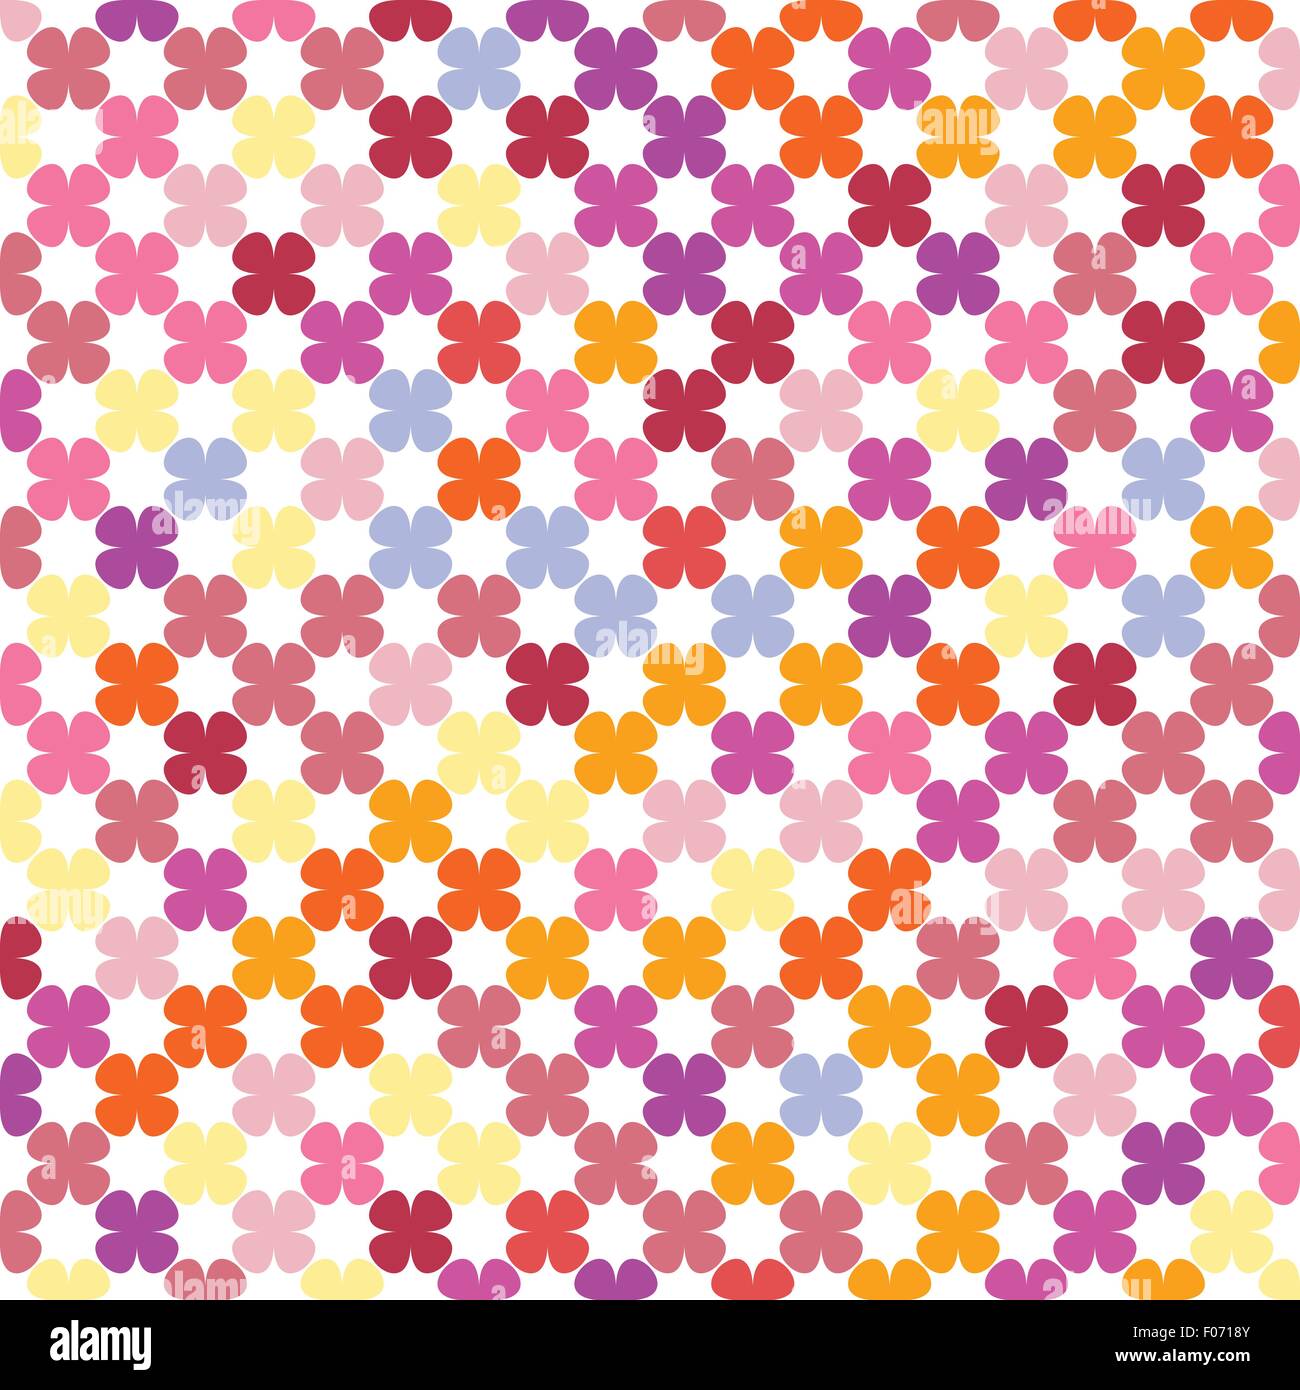 abstract flowers repeating texture background vector illustration Stock Vector